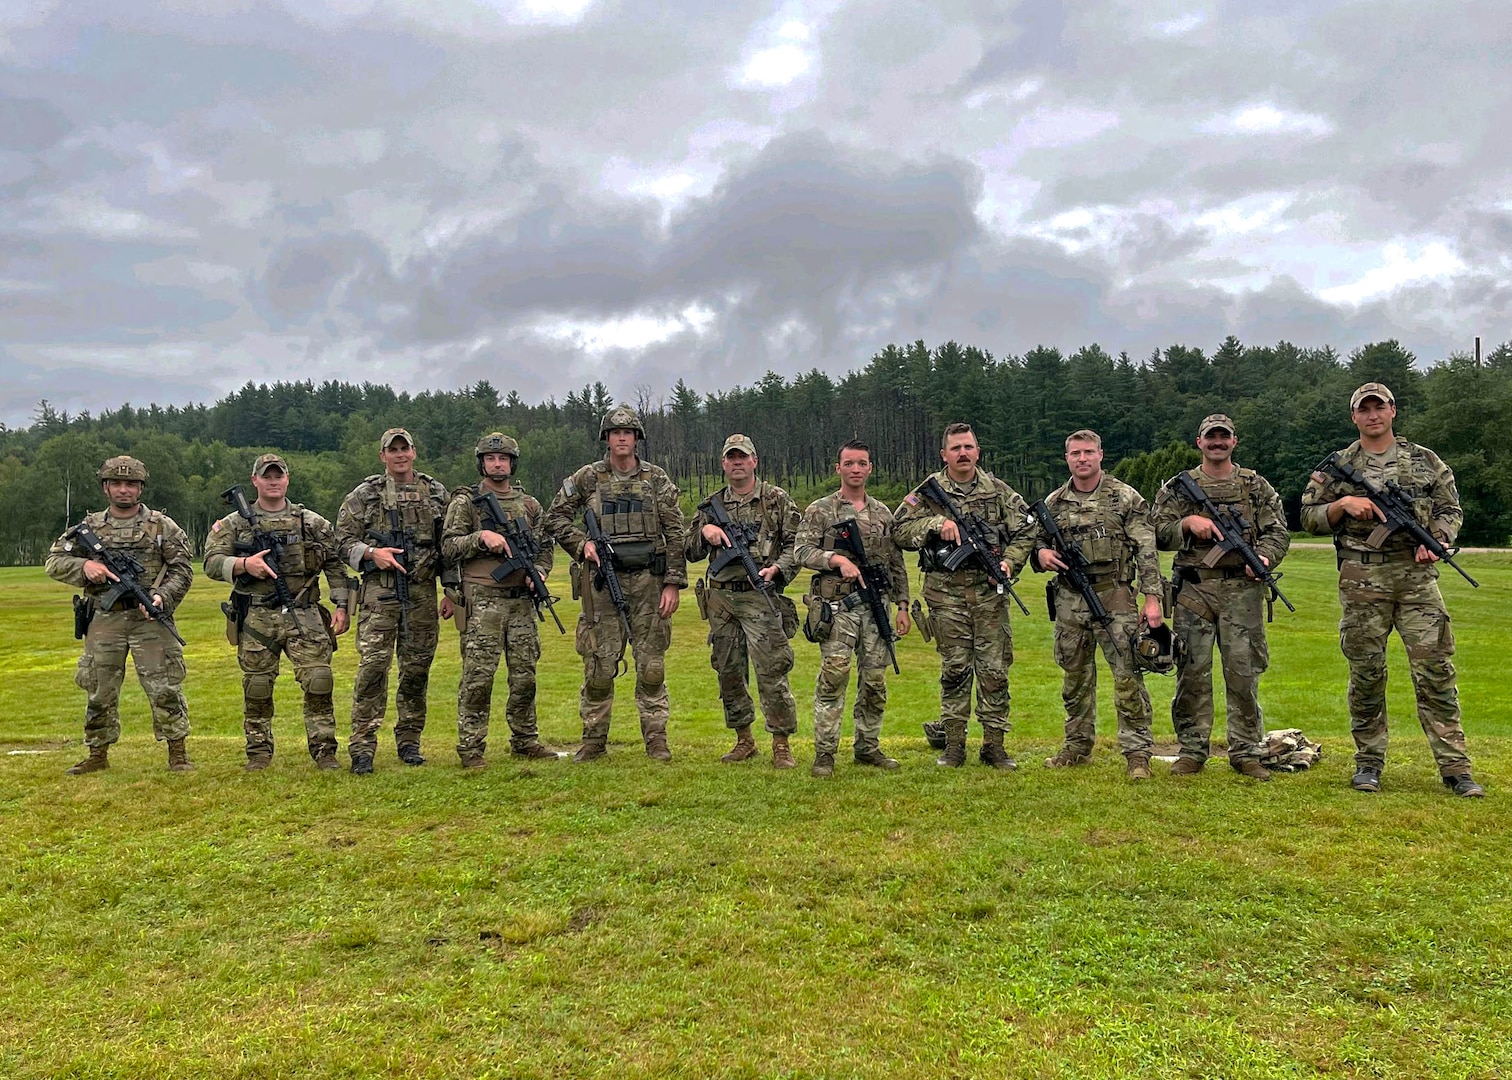 New Hampshire National Guard marksmen pose at the Marksmanship Advisory Council “MAC” Region 1 Championship held Aug. 18- 20, 2023, at Camp Ethan Allen Training Site in Jericho, Vermont. Led by Sgt. 1st Class Joseph Wyner, the state marksmanship coordinator, New Hampshire fielded three teams of Soldiers and Airmen, won first and second team aggregate, and earned 30 team and individual awards.